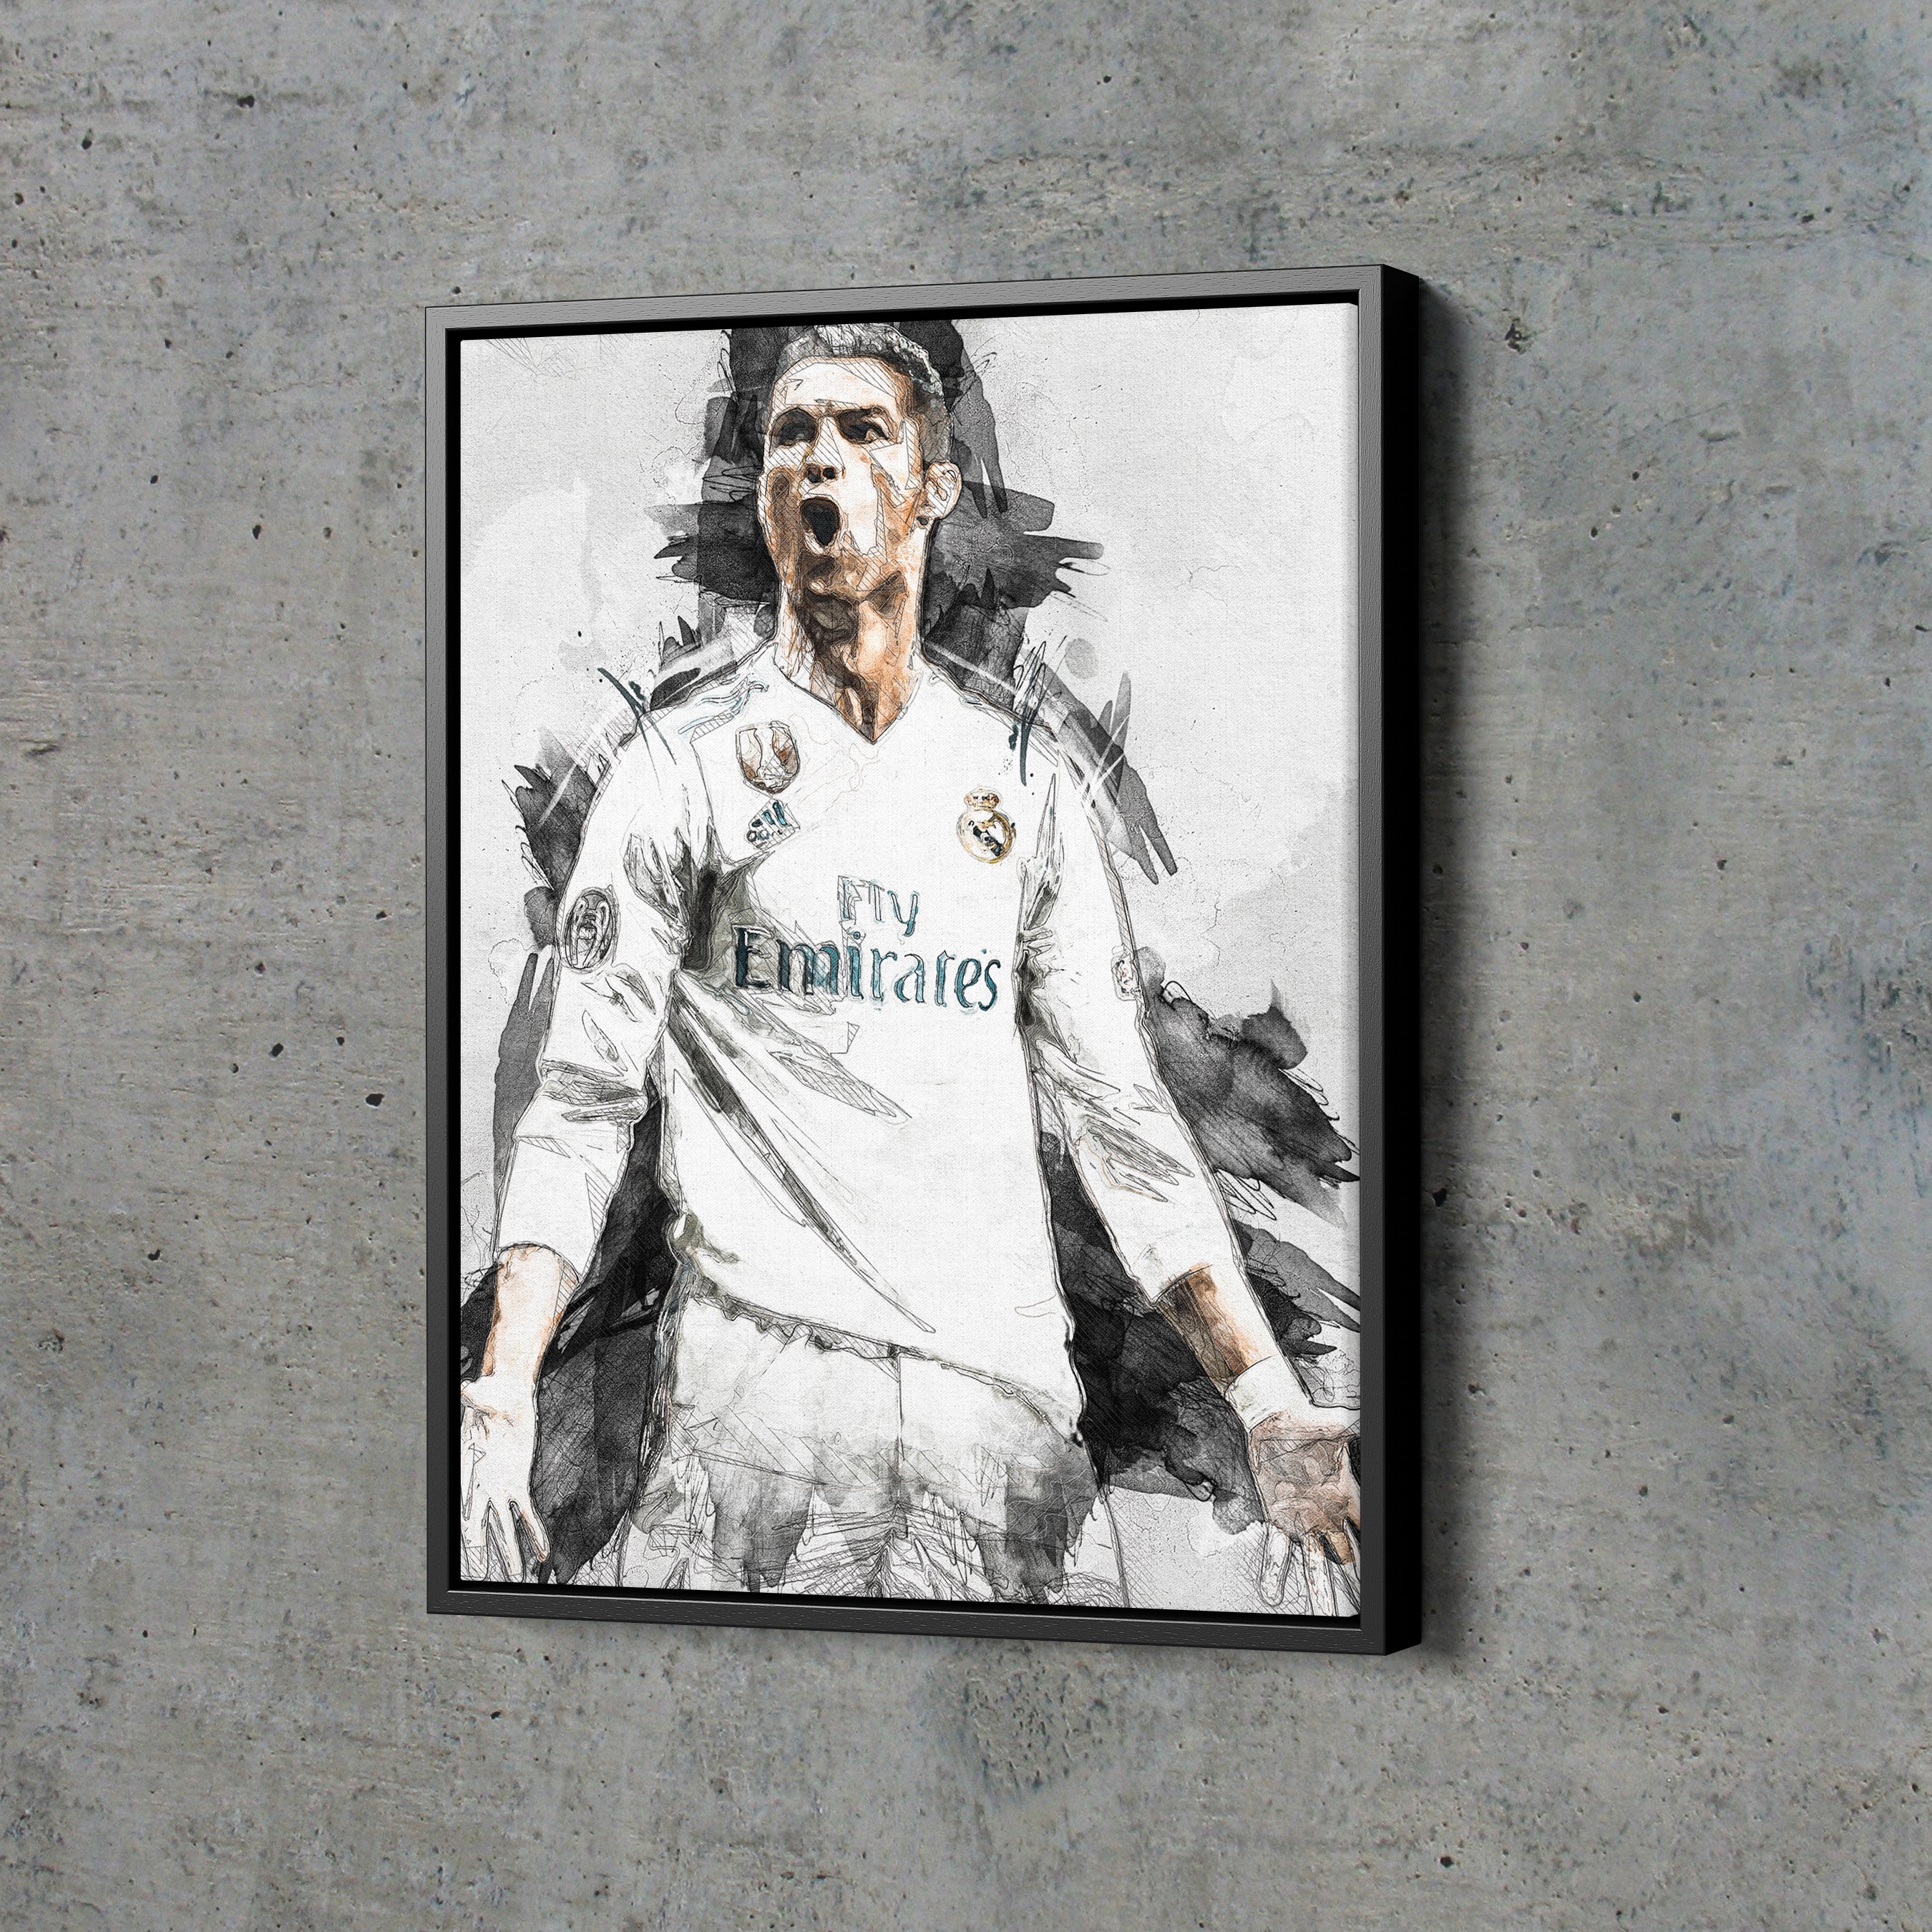 Real Madrid - Framed Soccer Poster (The Star Players) (Size: 24 X